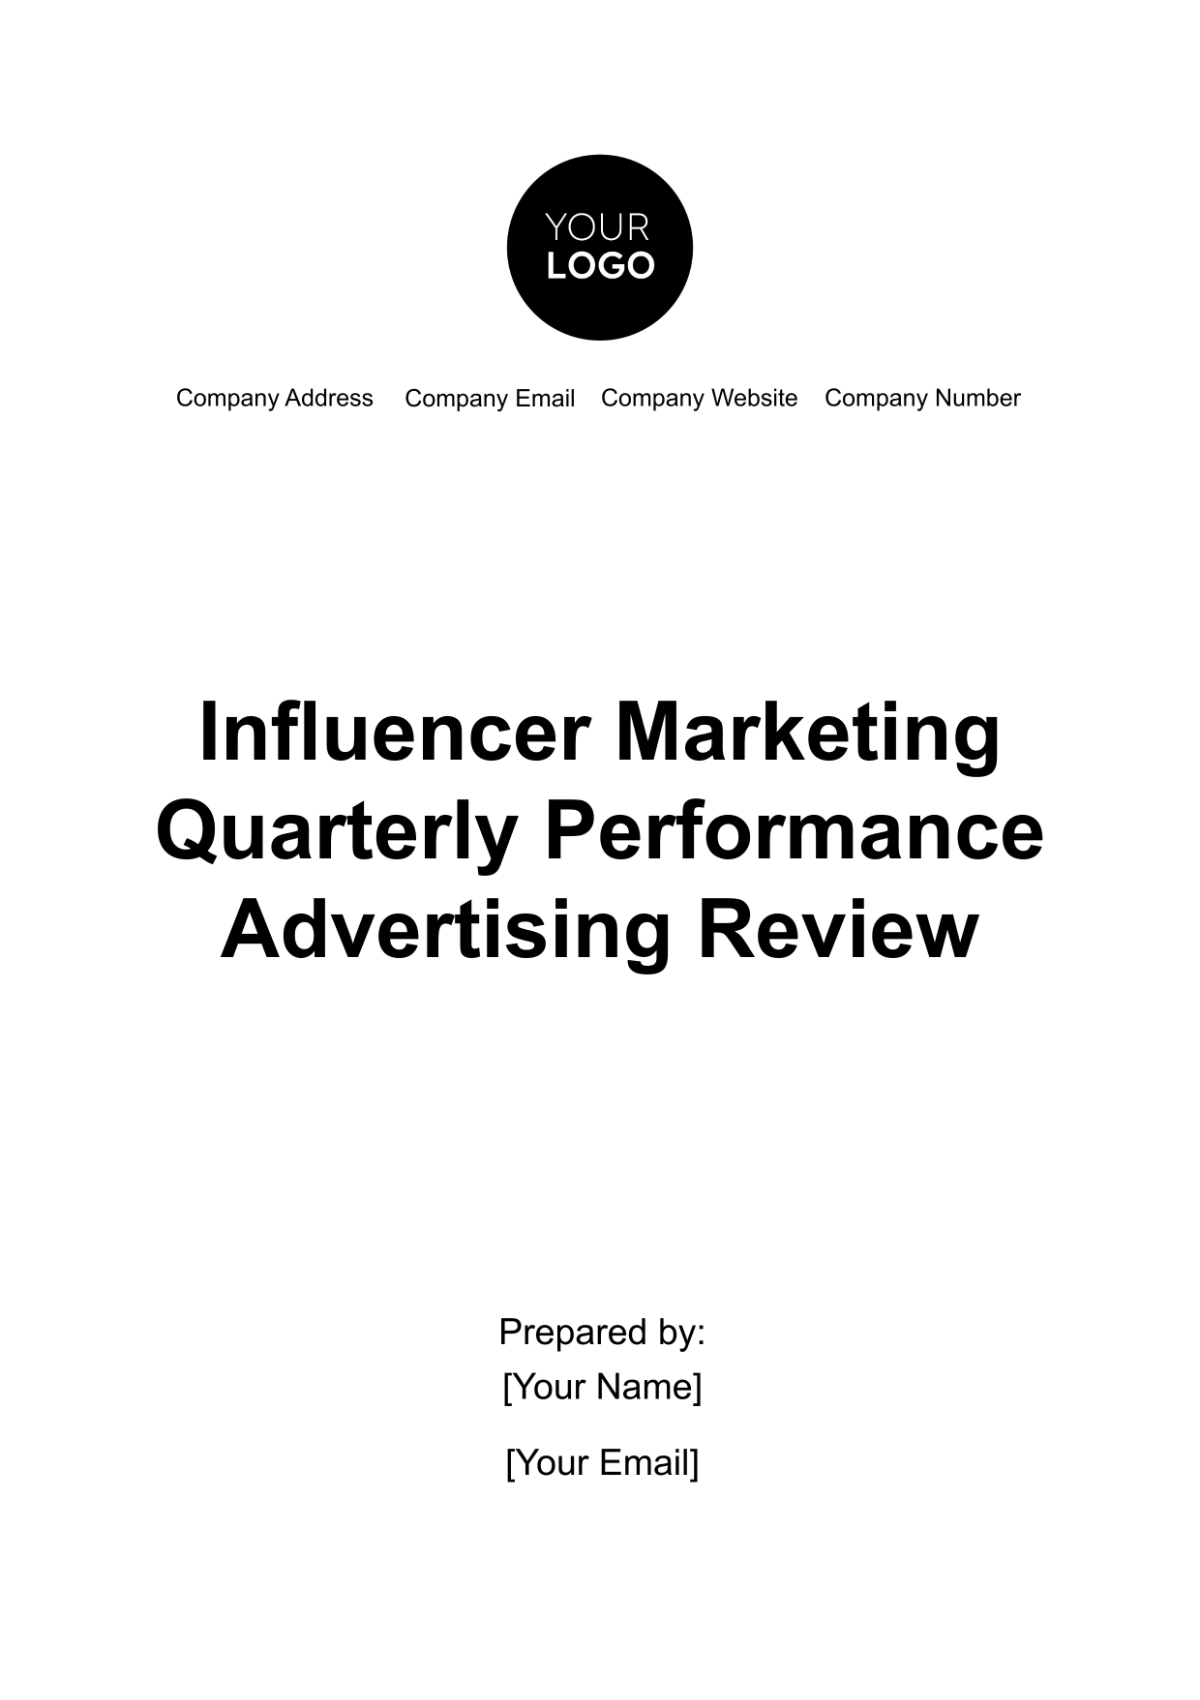 Influencer Marketing Quarterly Performance Advertising Review Template